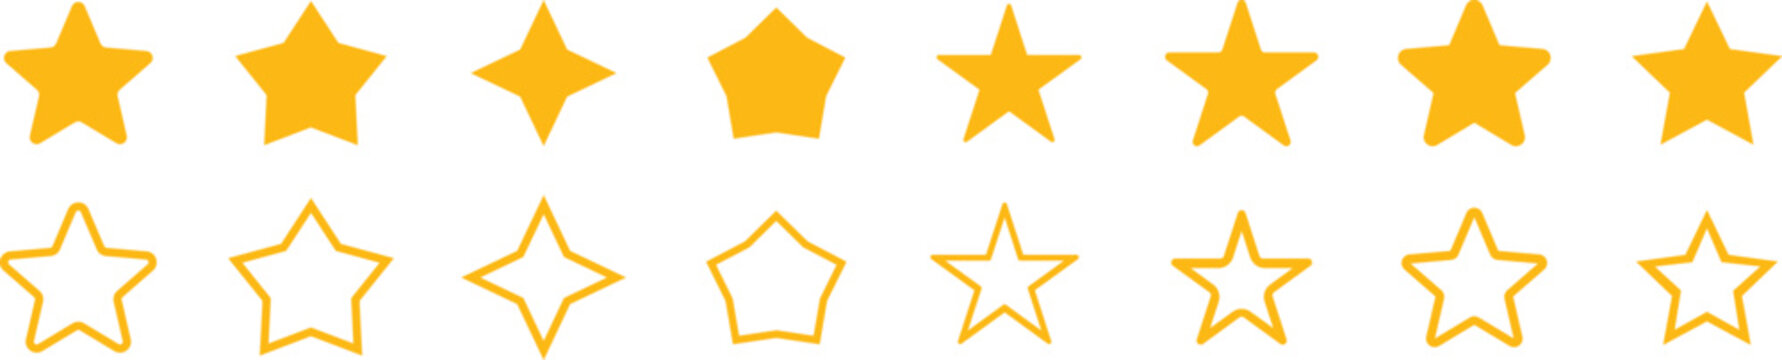 Set of star icons. Rating Star icon. Star vector collection. Modern simple stars. Vector illustration